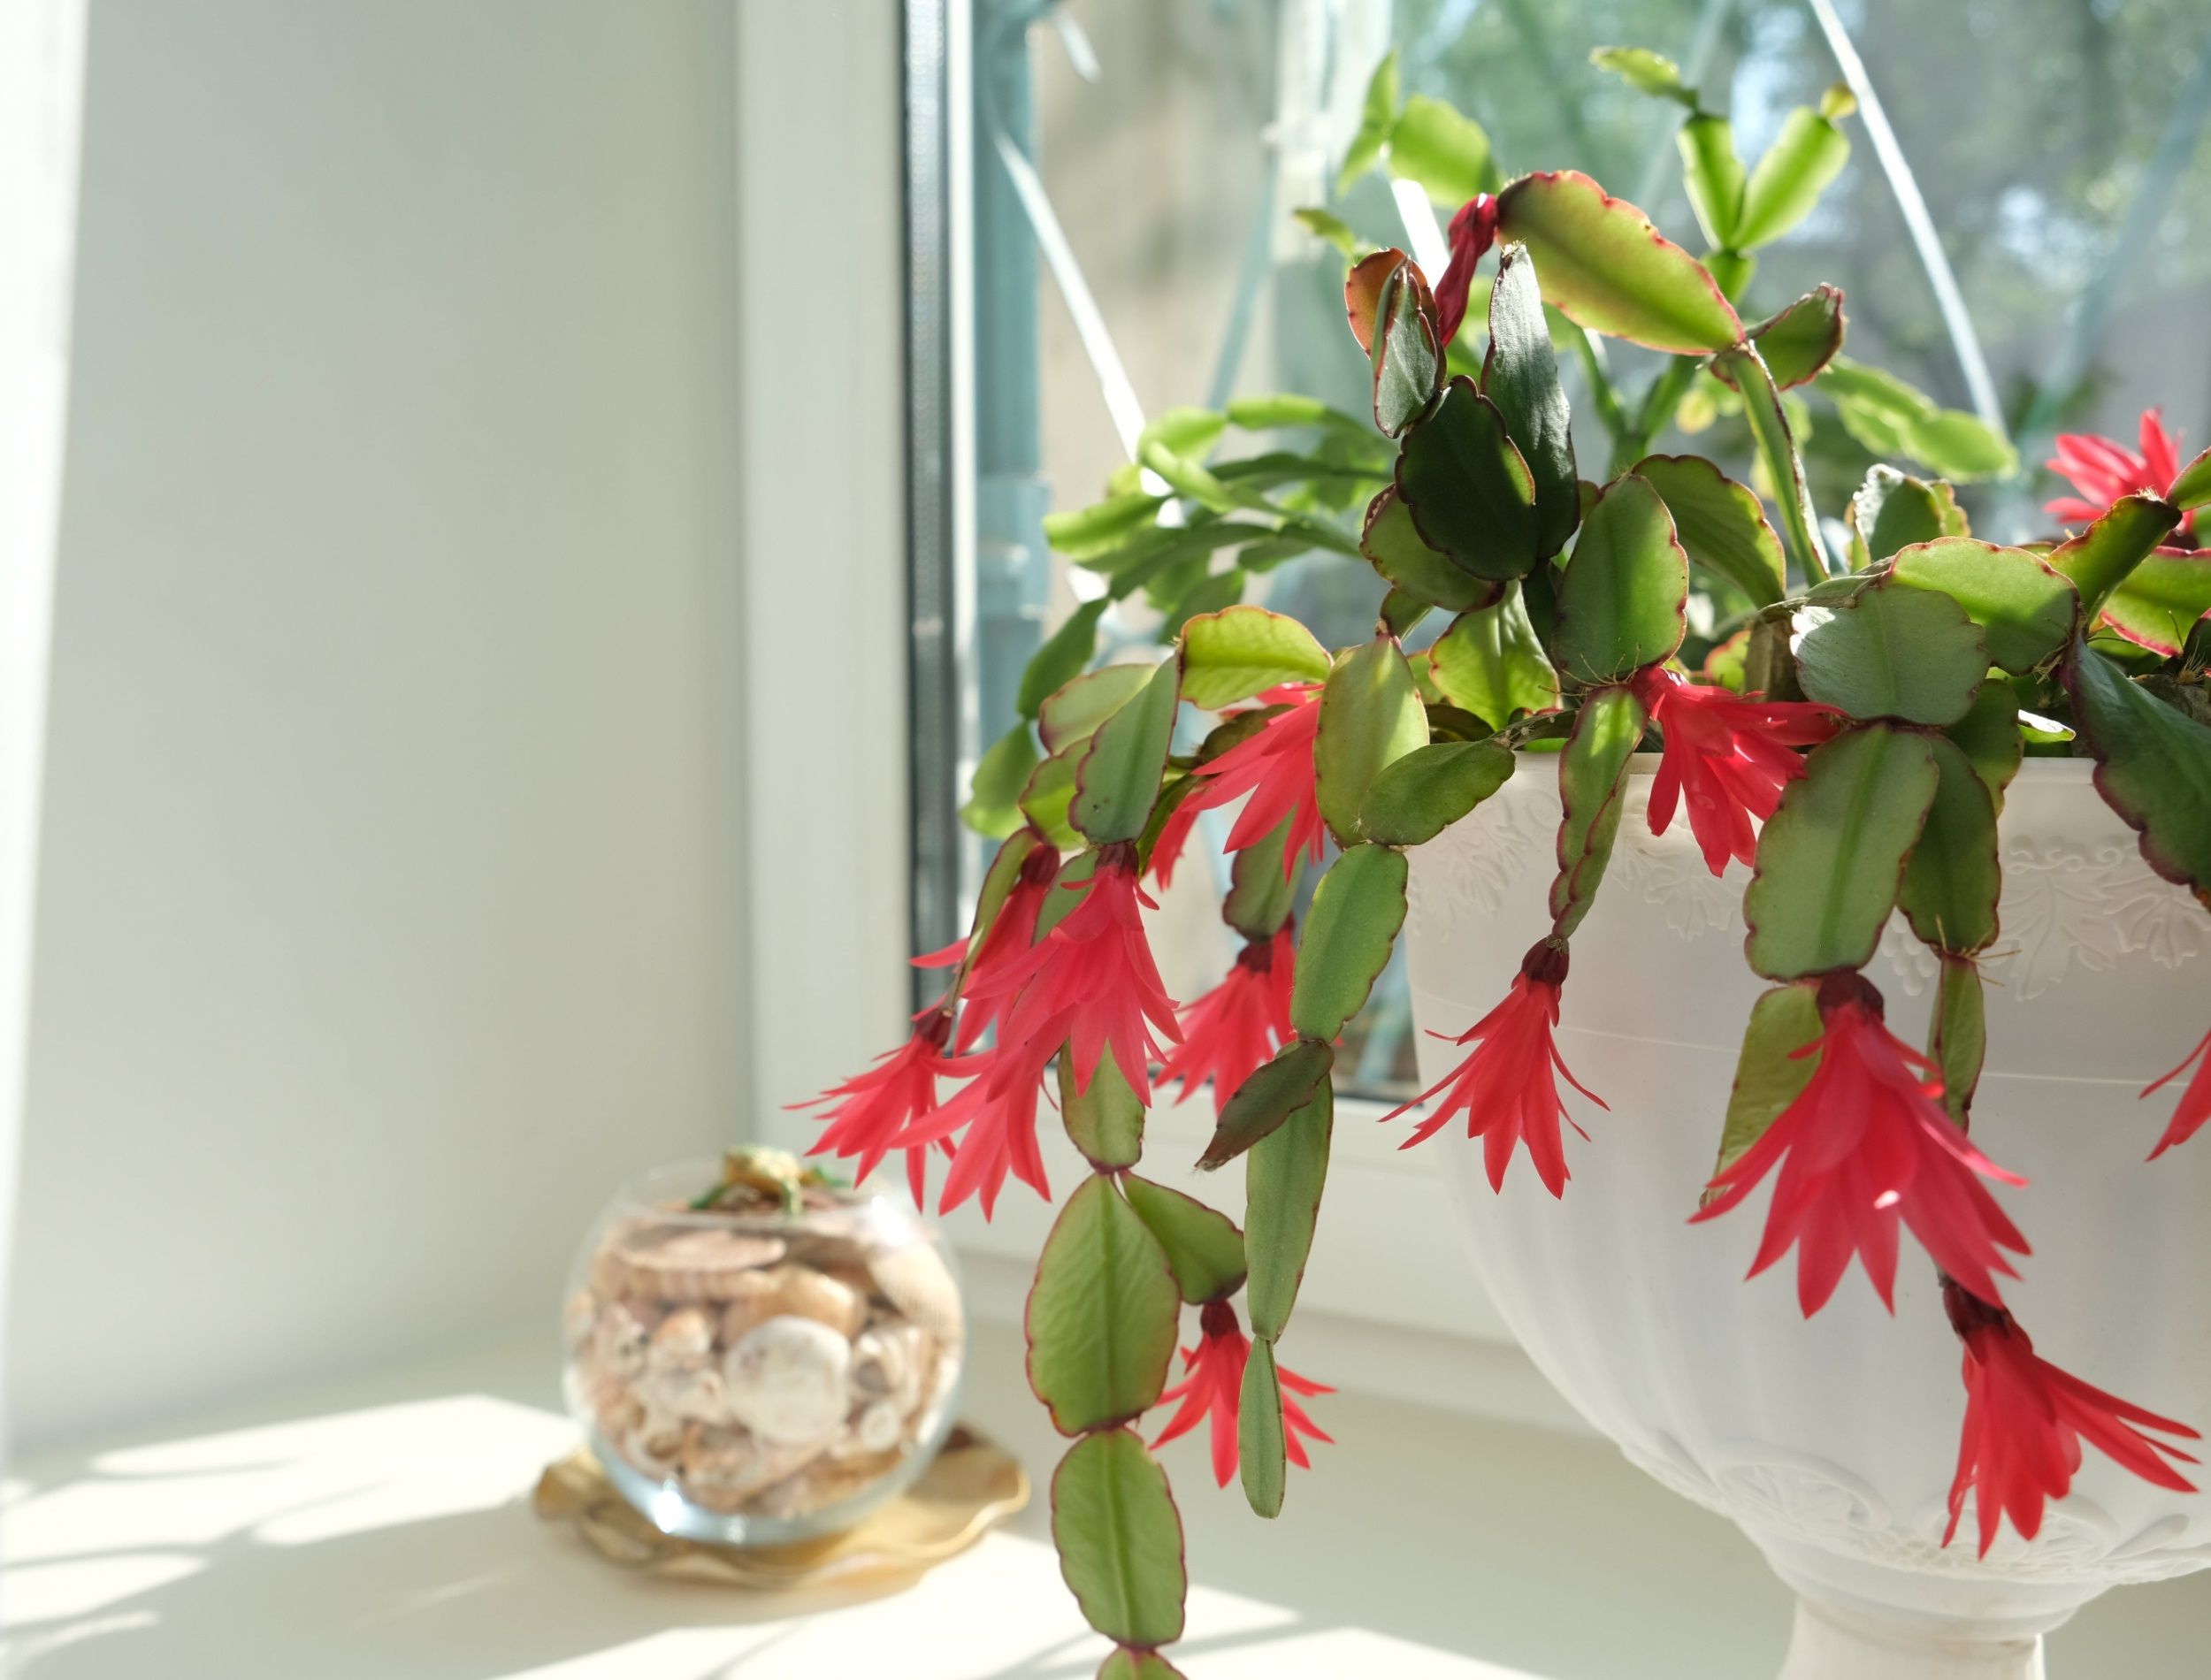 Epiphytic Cactus Schlumbergera bloom on white window sill. Christmas cactus with red flower